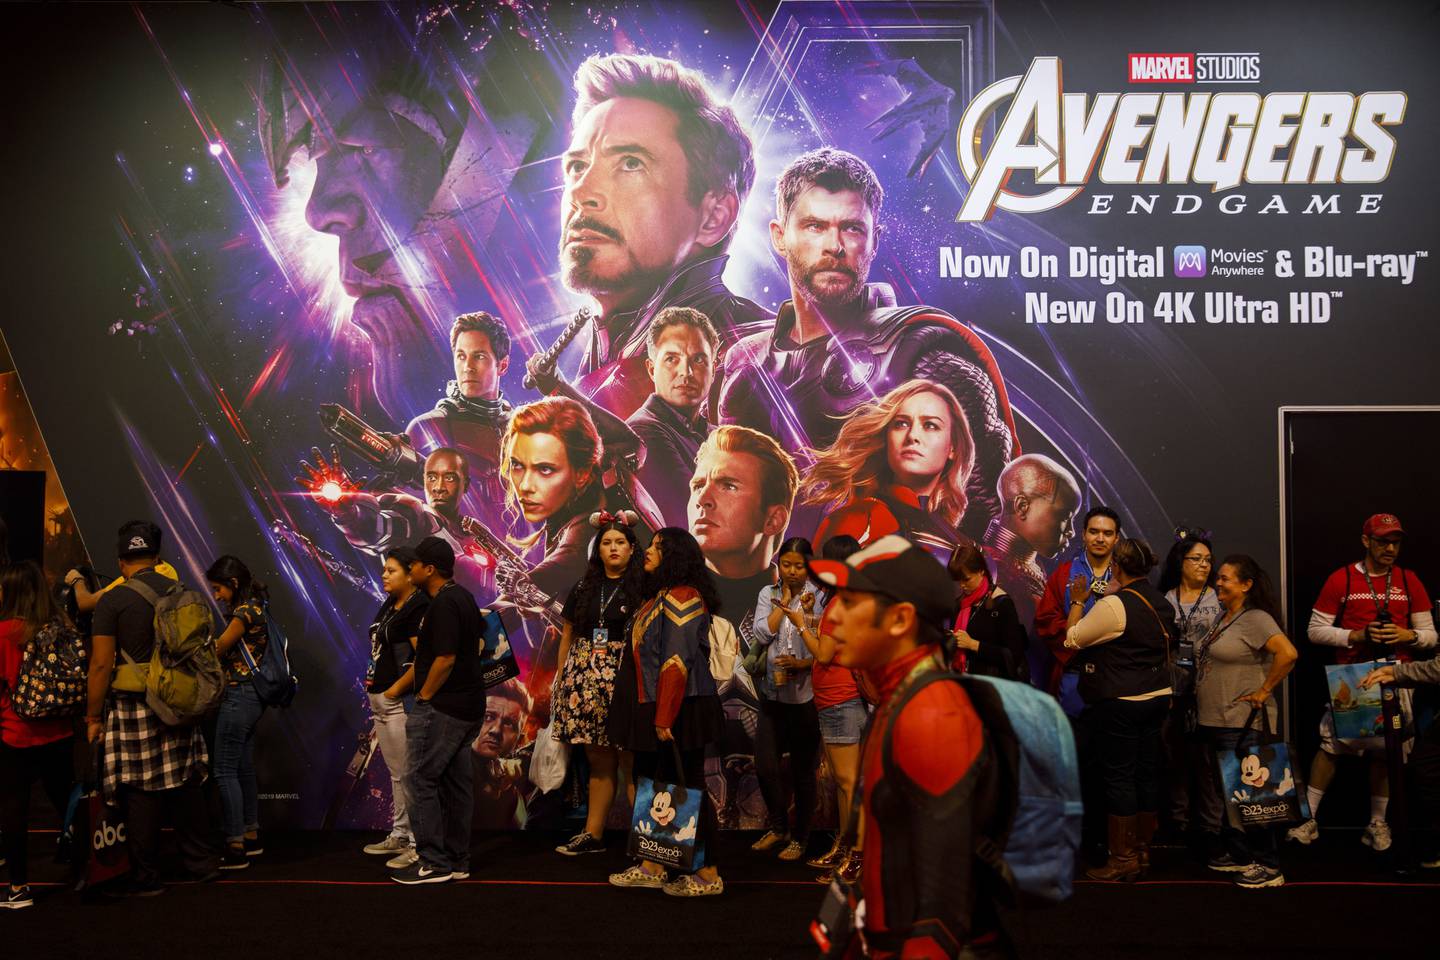 Attendees wait in line in front of a Marvel Studios Avengers Endgame poster during the D23 Expo 2019 in Anaheim, California, U.S., on Friday, Aug. 23, 2019. Walt Disney Co. is turning the D23 Expo, the biennial fan conclave, into a big push for its new streaming services. Photographer: Patrick T. Fallon/Bloombergdfd